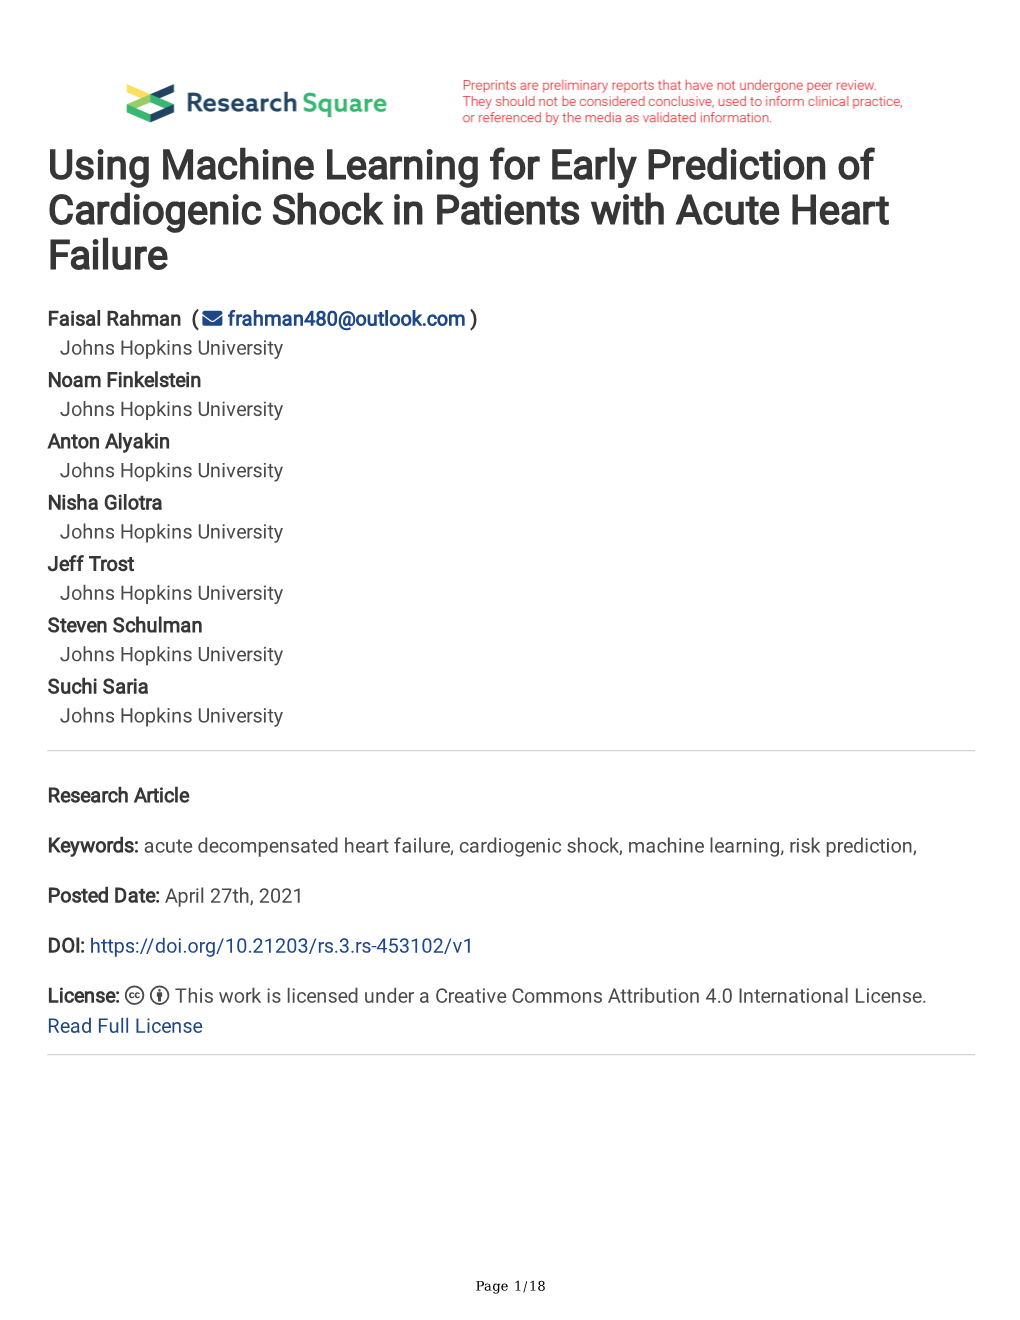 Using Machine Learning for Early Prediction of Cardiogenic Shock in Patients with Acute Heart Failure